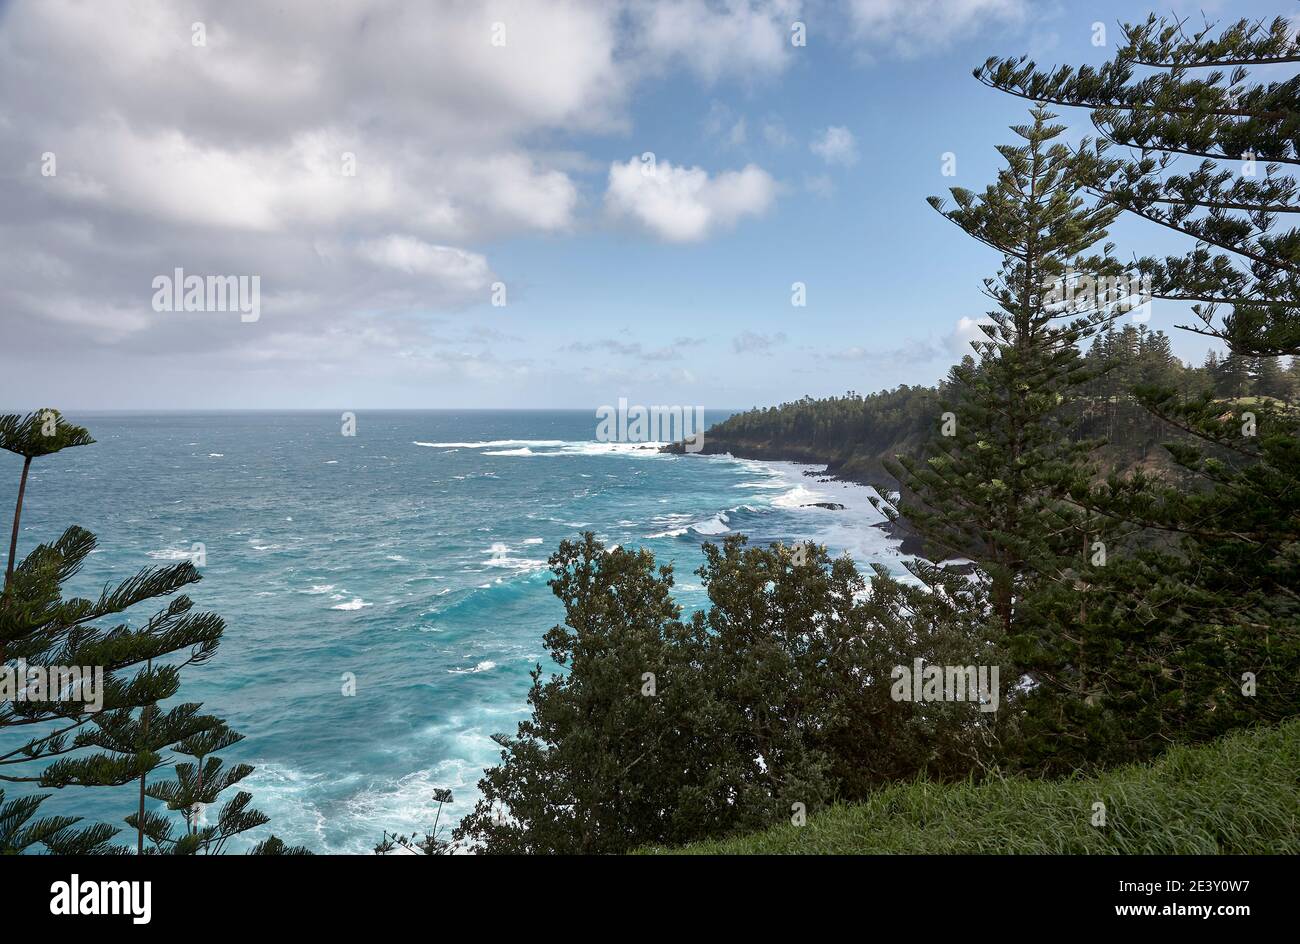 View of Cresswell Bay and its coastline with Norfolk Pine hugging the cliff edge an on a sunny day with broken cloud, Norfolk Island, Australia Stock Photo